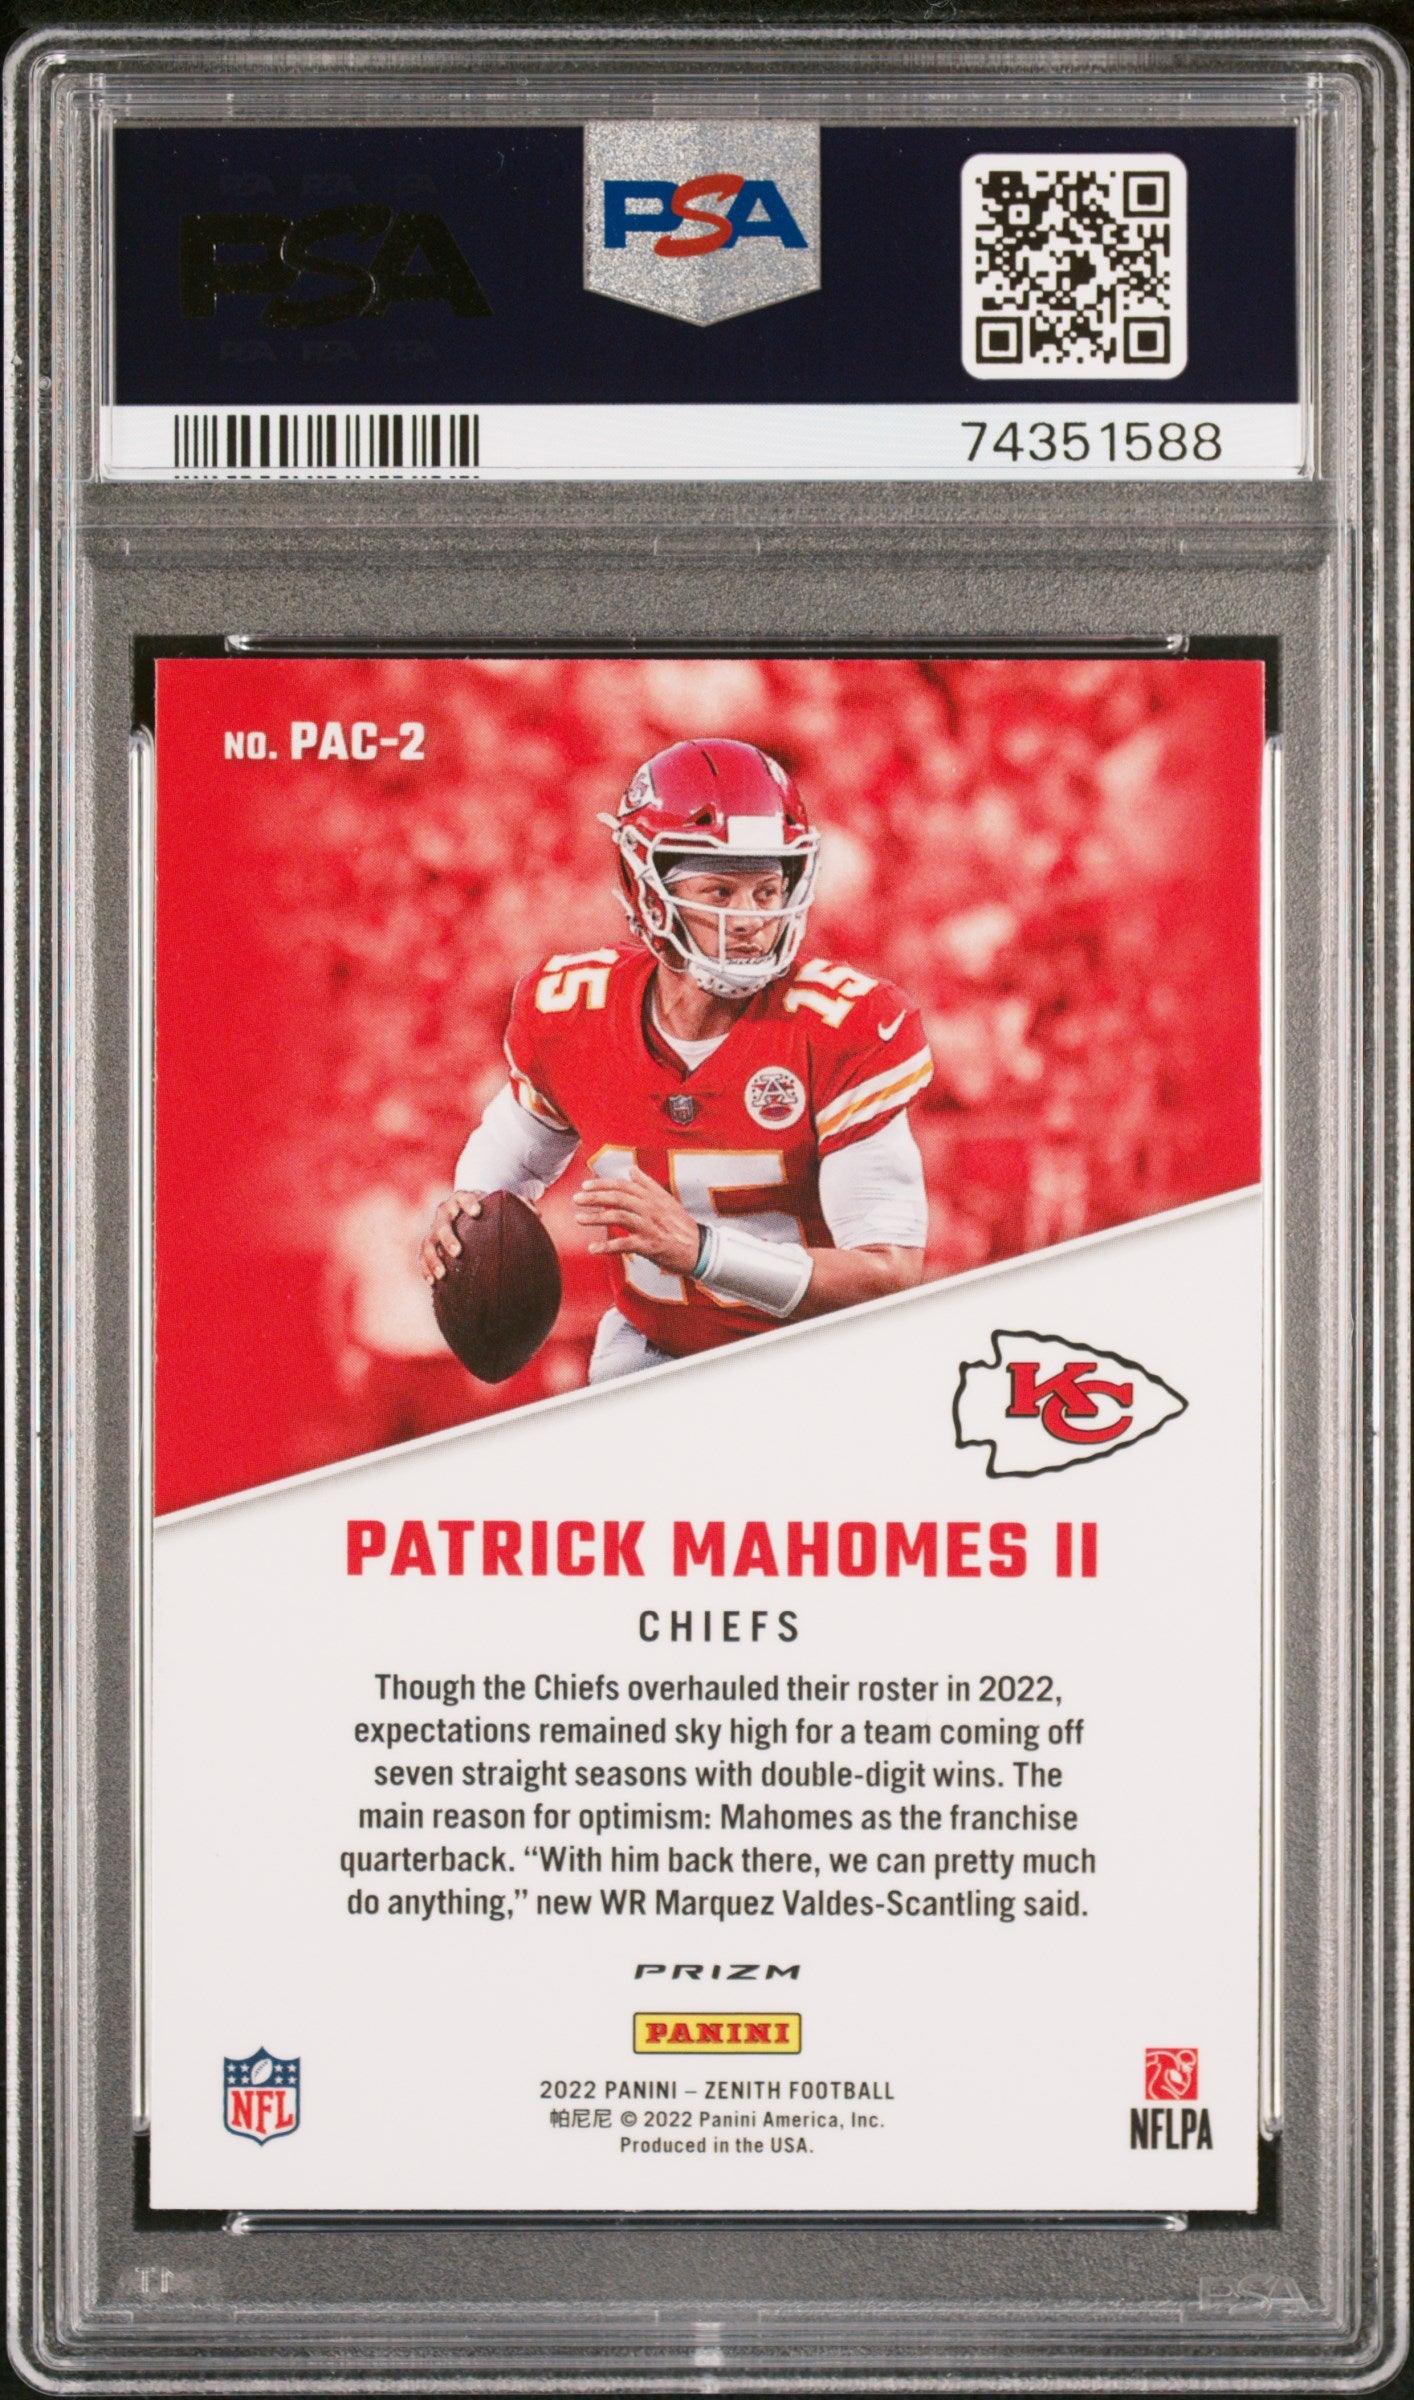 Rare Patrick Mahomes rookie card up for auction